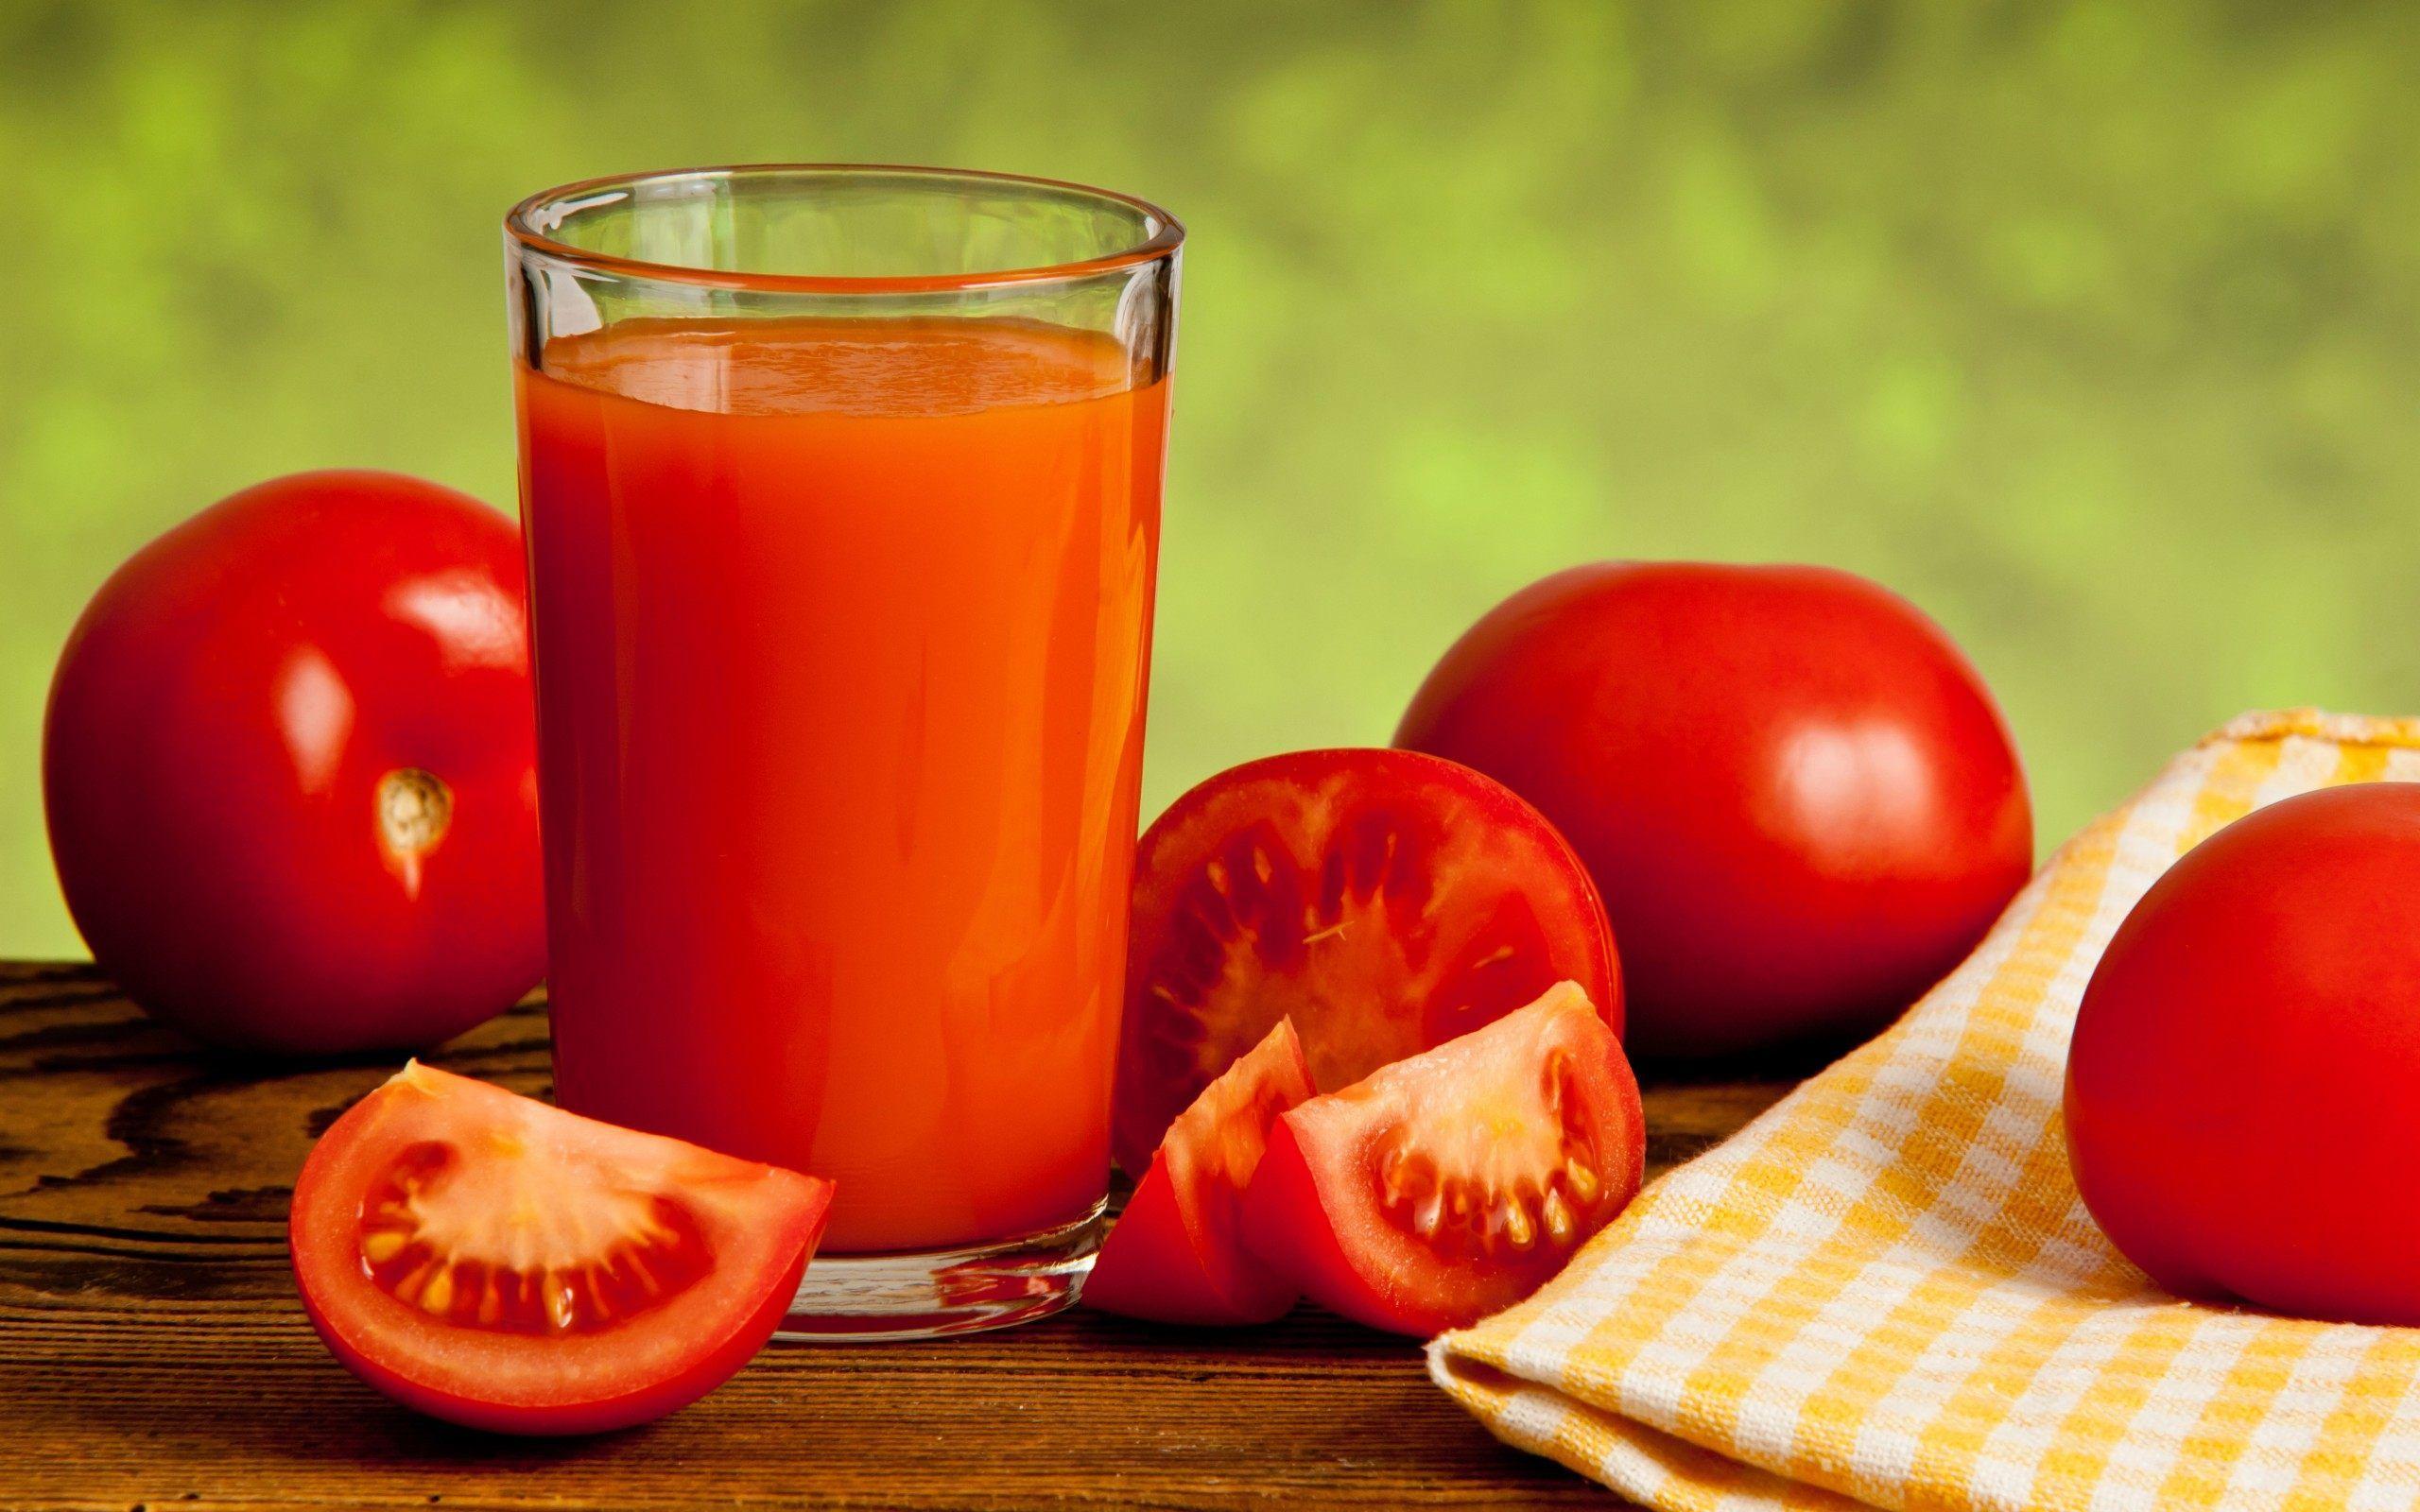 Tomato Juice & Red Tomatoes HD Wallpaper